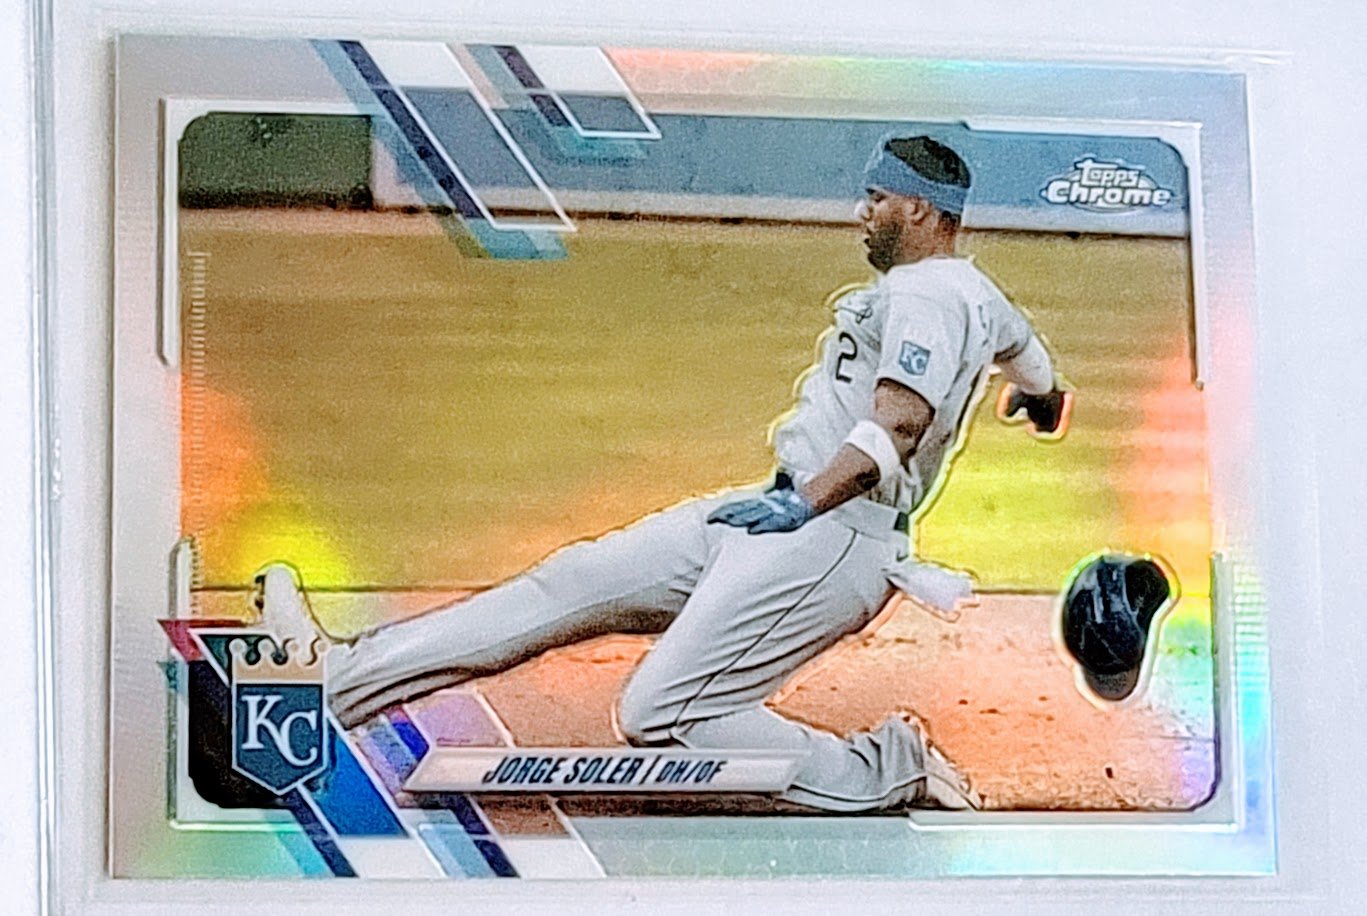 2021 Topps Chrome Jorge Soler Refractor Baseball Card TPTV simple Xclusive Collectibles   